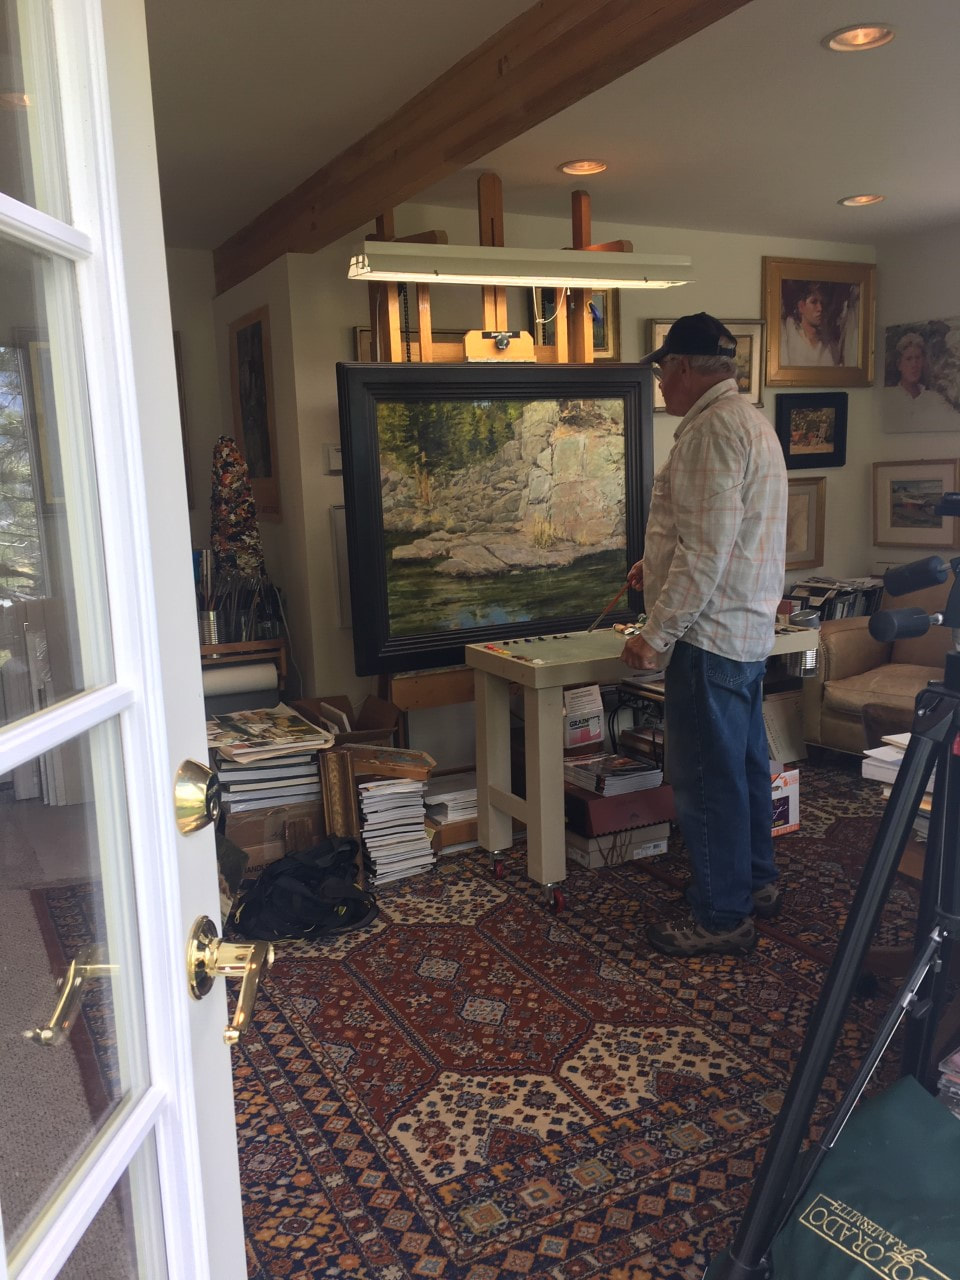 Jim has a beautiful studio set up at his Estes Park home and he's been busy painting these days of stay-at-home.  He's provided us with a handful of plein-air study images that are available for sale unframed  (while custom framing is on hold). Check them out in our preorder - art tied up in production section of our online store. Your order will safely ship directly from the studio. #WIP #ContemporaryLandscape #OilPainting #JimBiggers